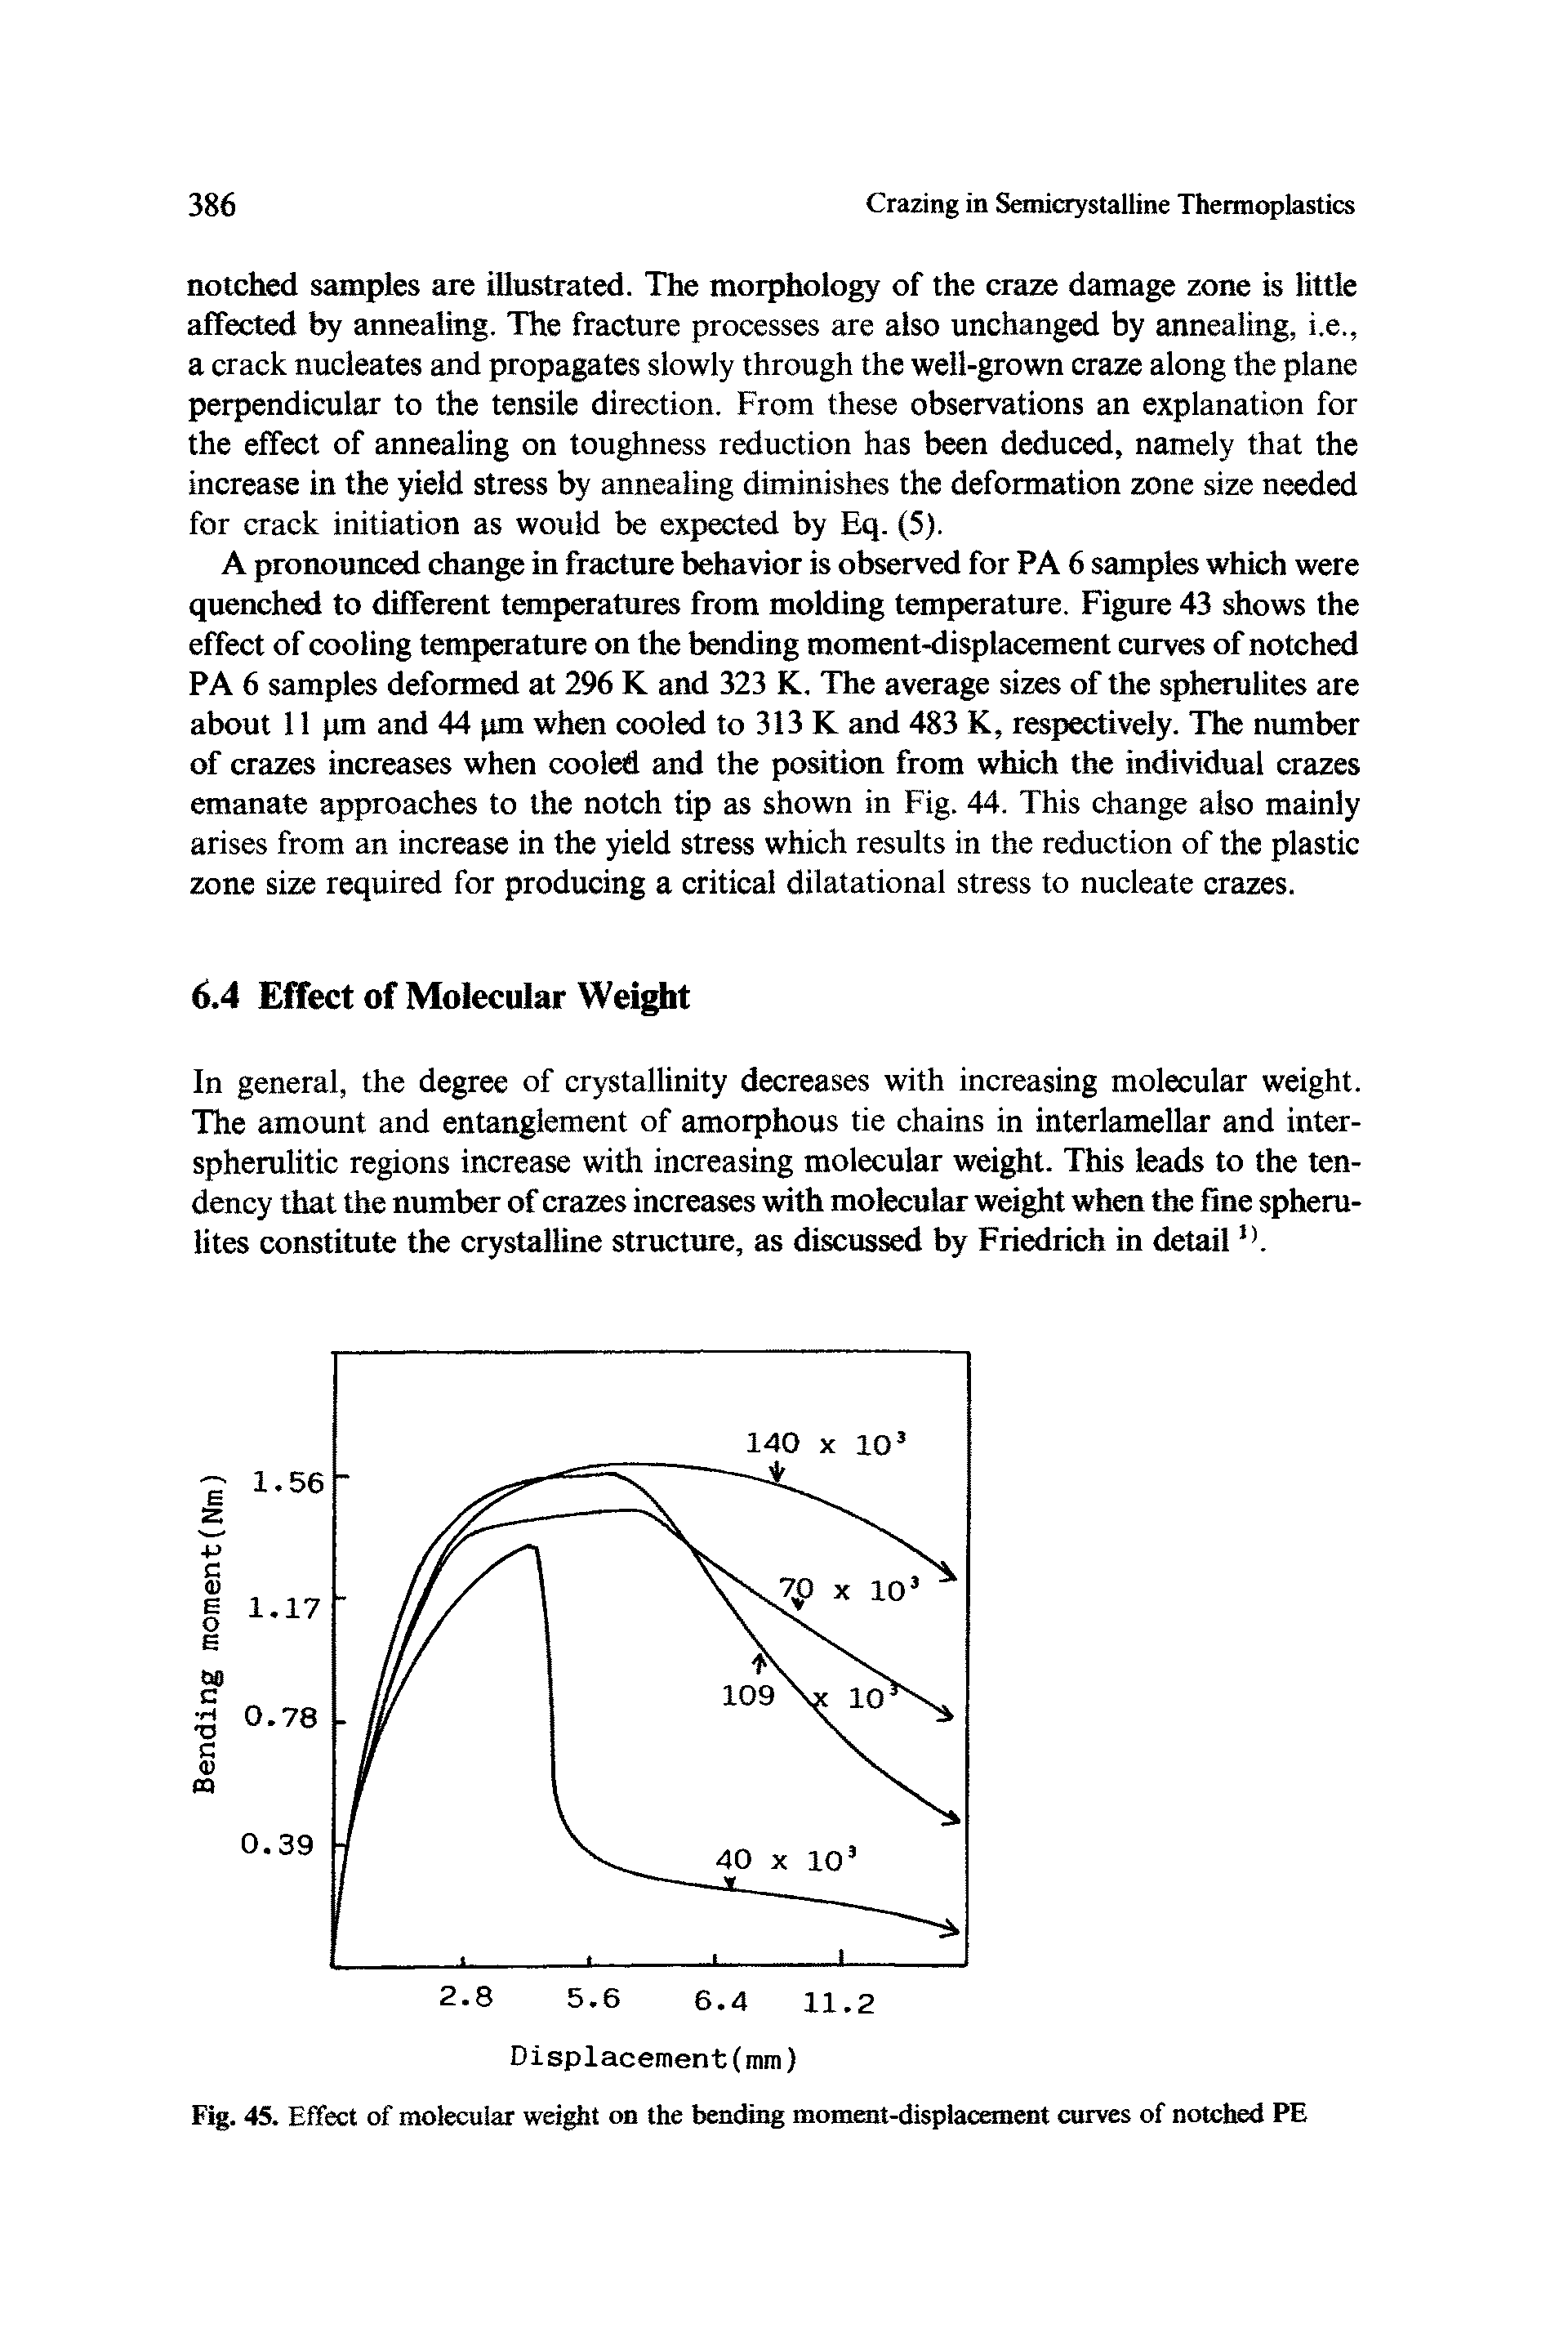 Fig. 45. Effect of molecular weight on the bending moment-displacement curves of notched PE...